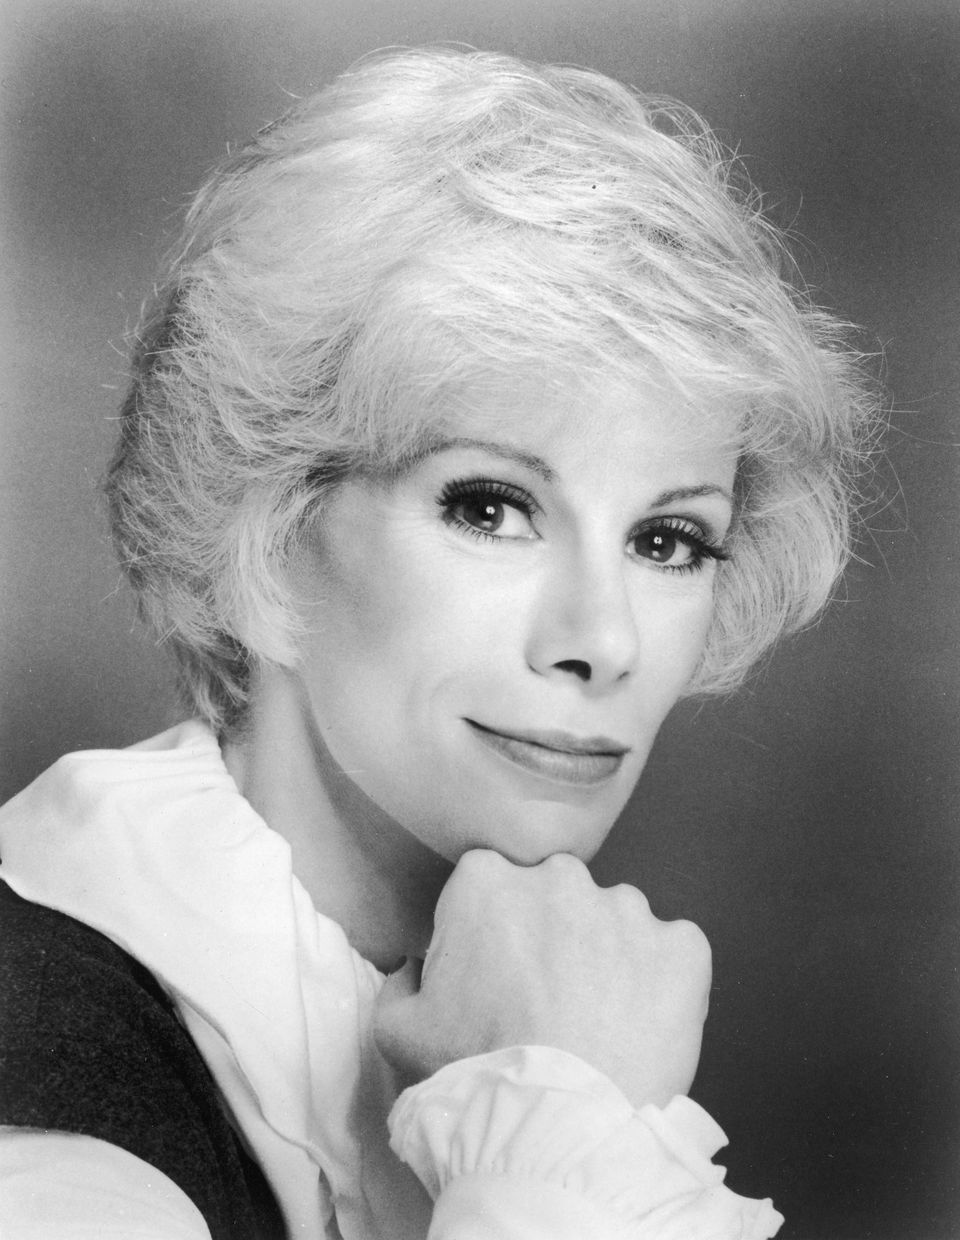 "<a href="http://www.theguardian.com/stage/2012/aug/09/comedy-gold-joan-rivers" role="link" class=" js-entry-link cet-external-link" data-vars-item-name="I hate thin people" data-vars-item-type="text" data-vars-unit-name="60d19682e4b048c106102387" data-vars-unit-type="buzz_body" data-vars-target-content-id="http://www.theguardian.com/stage/2012/aug/09/comedy-gold-joan-rivers" data-vars-target-content-type="url" data-vars-type="web_external_link" data-vars-subunit-name="before_you_go_slideshow" data-vars-subunit-type="component" data-vars-position-in-subunit="9">I hate thin people</a>; 'Oh, does the tampon make me look fat?'"